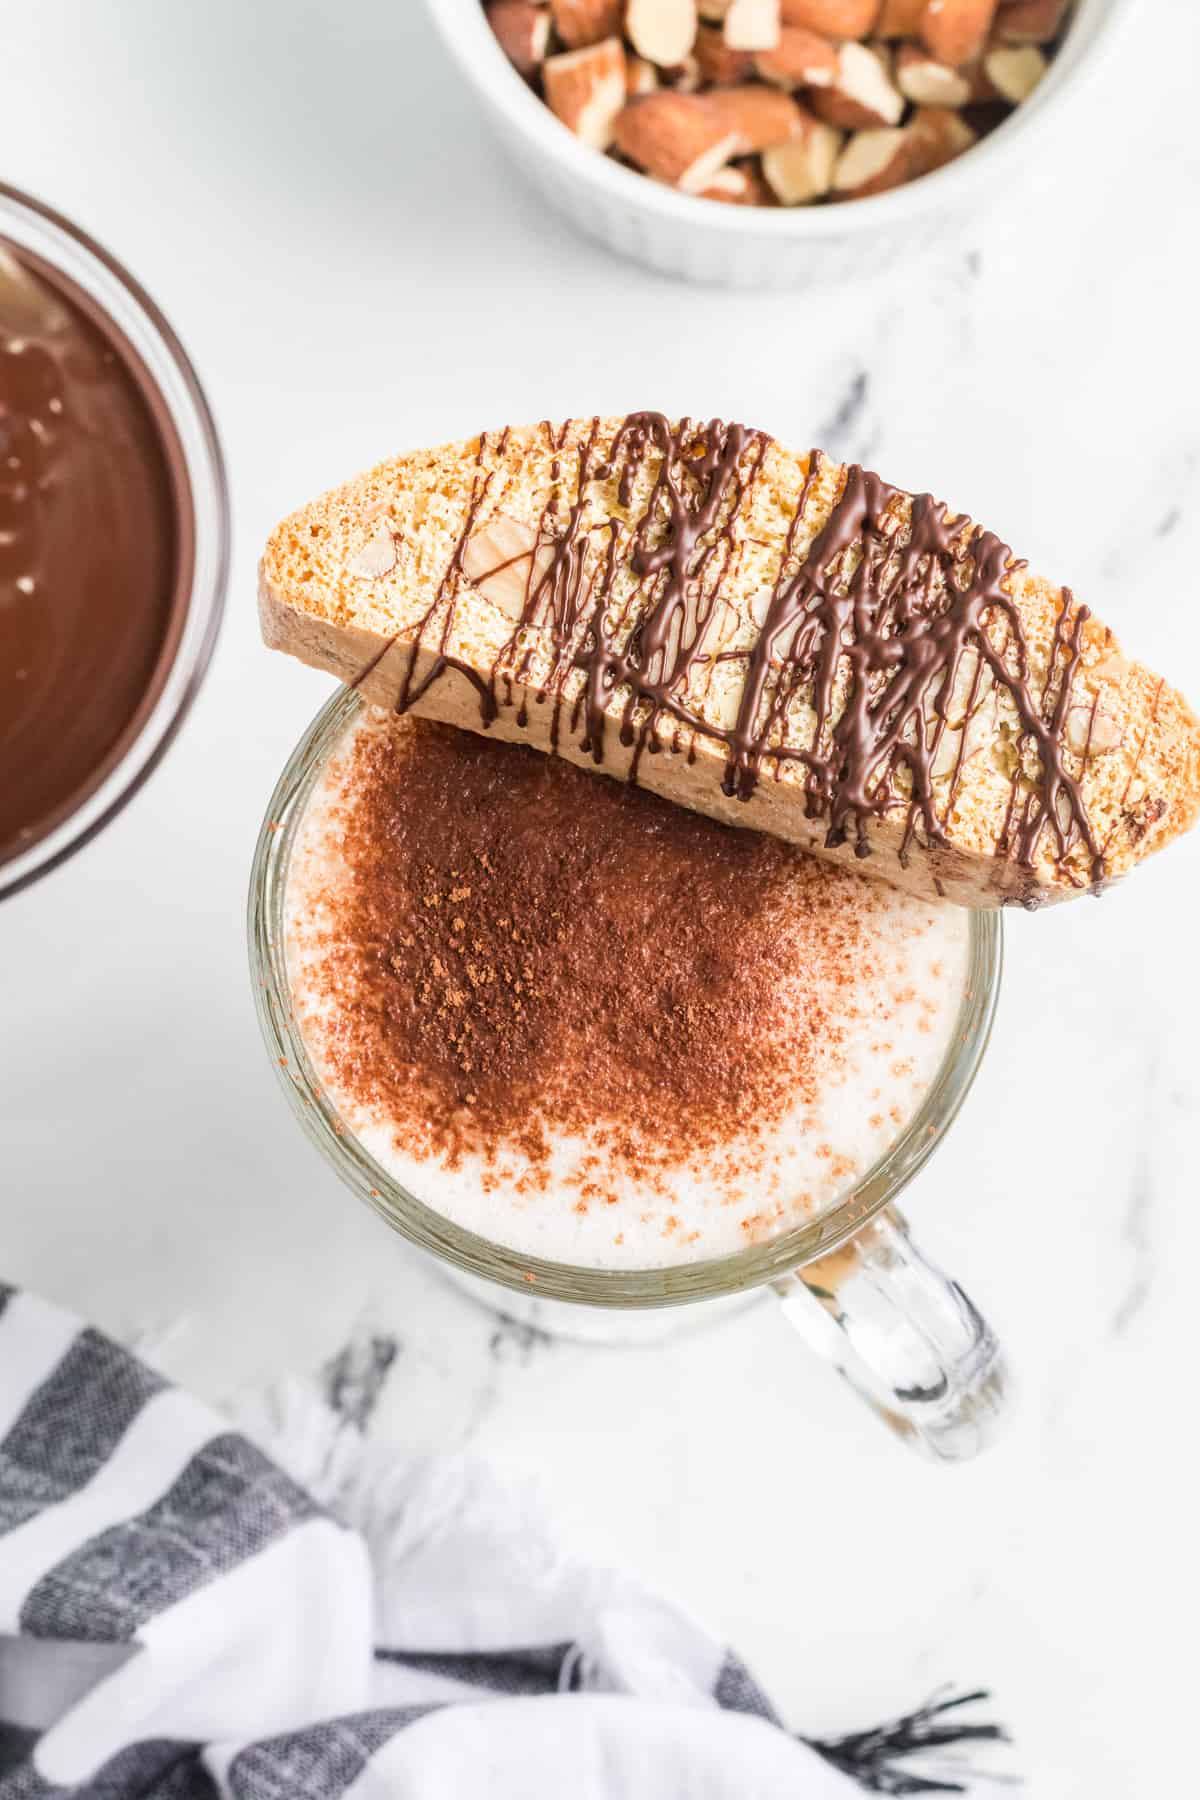 A chocolate covered almond biscotti resting on top of a cup of hot chocolate.